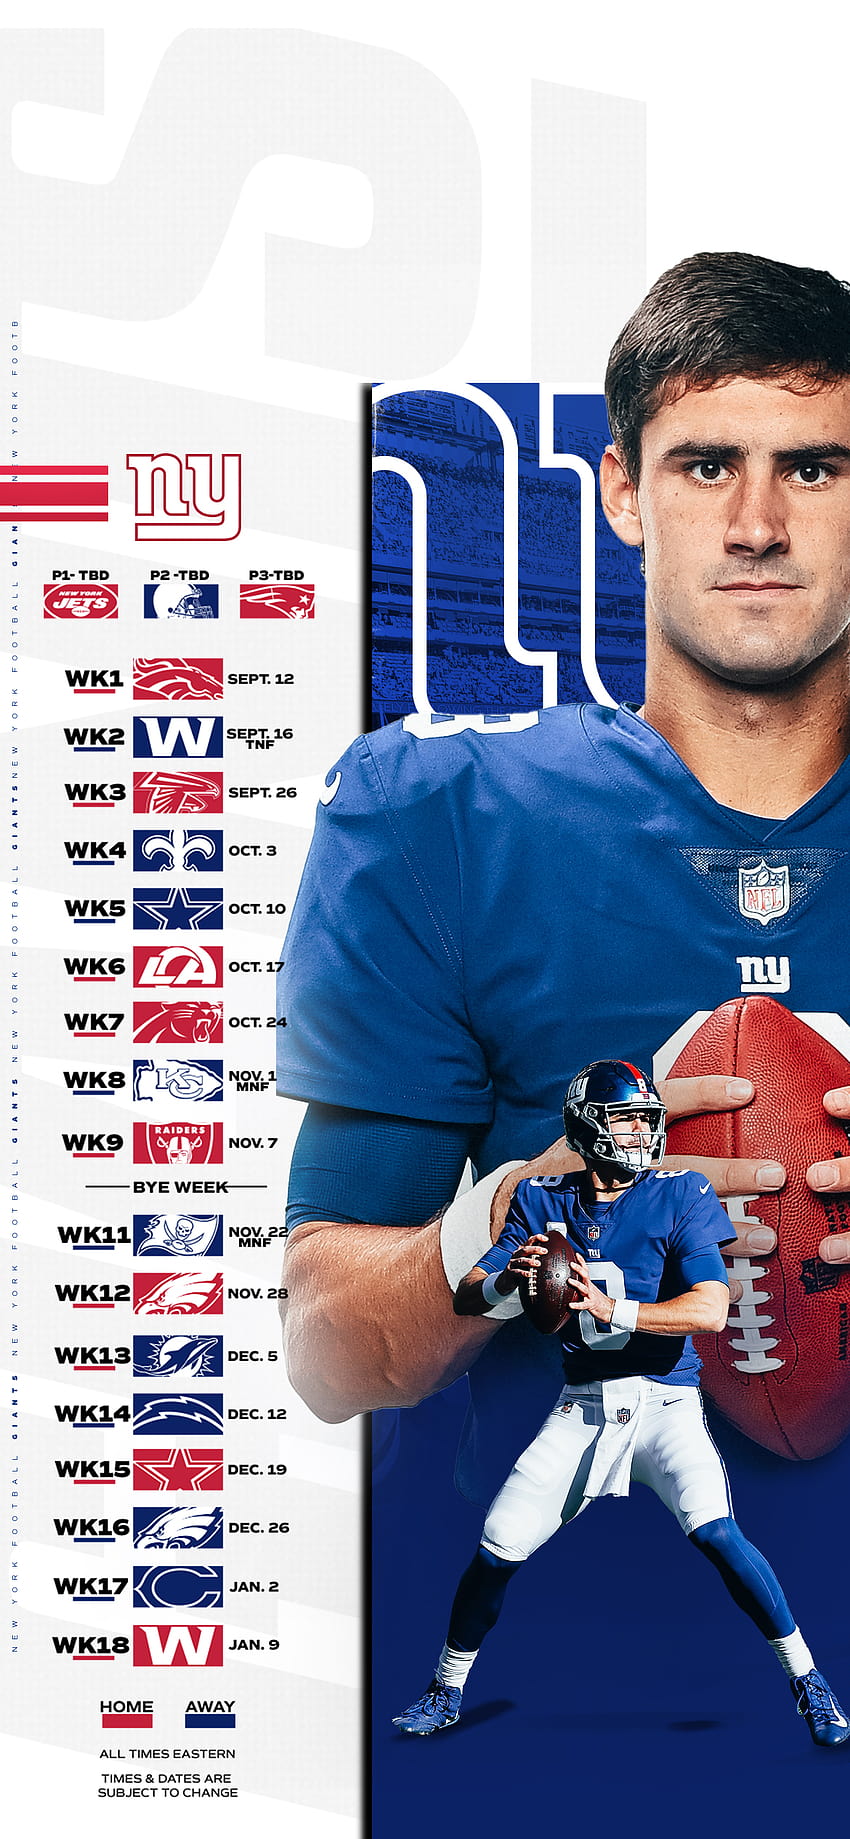 NY Giants Wallpaper (68+ images)